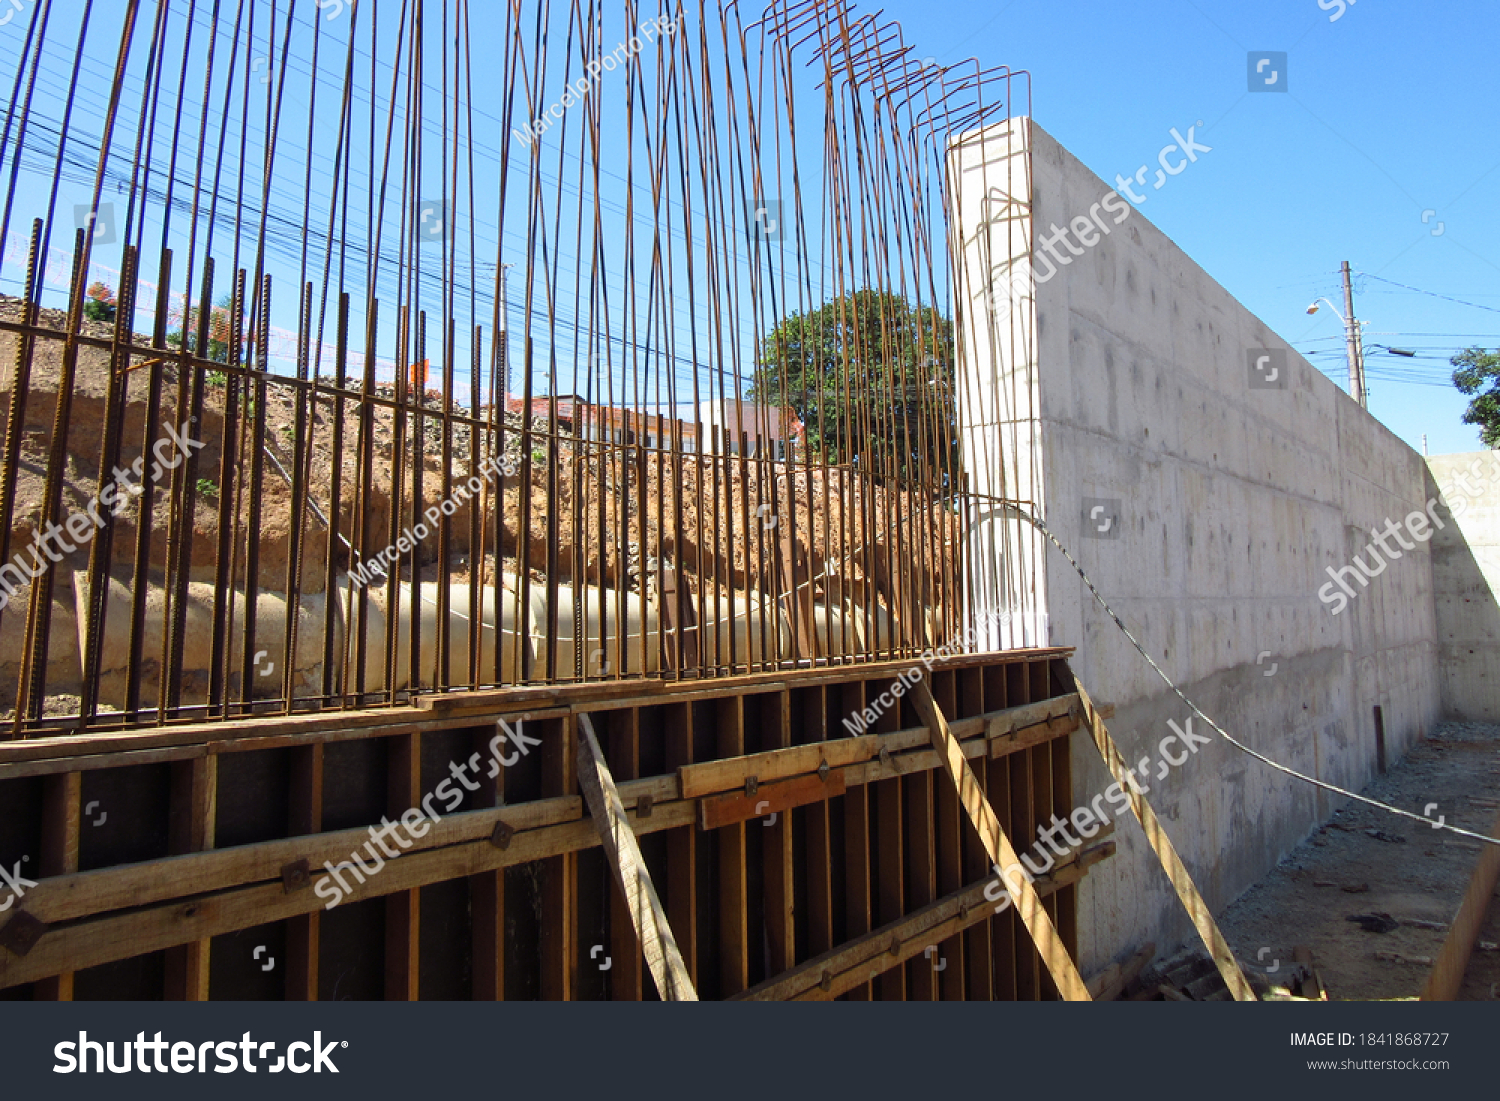 Reinforced concrete retaining wall construction #1841868727